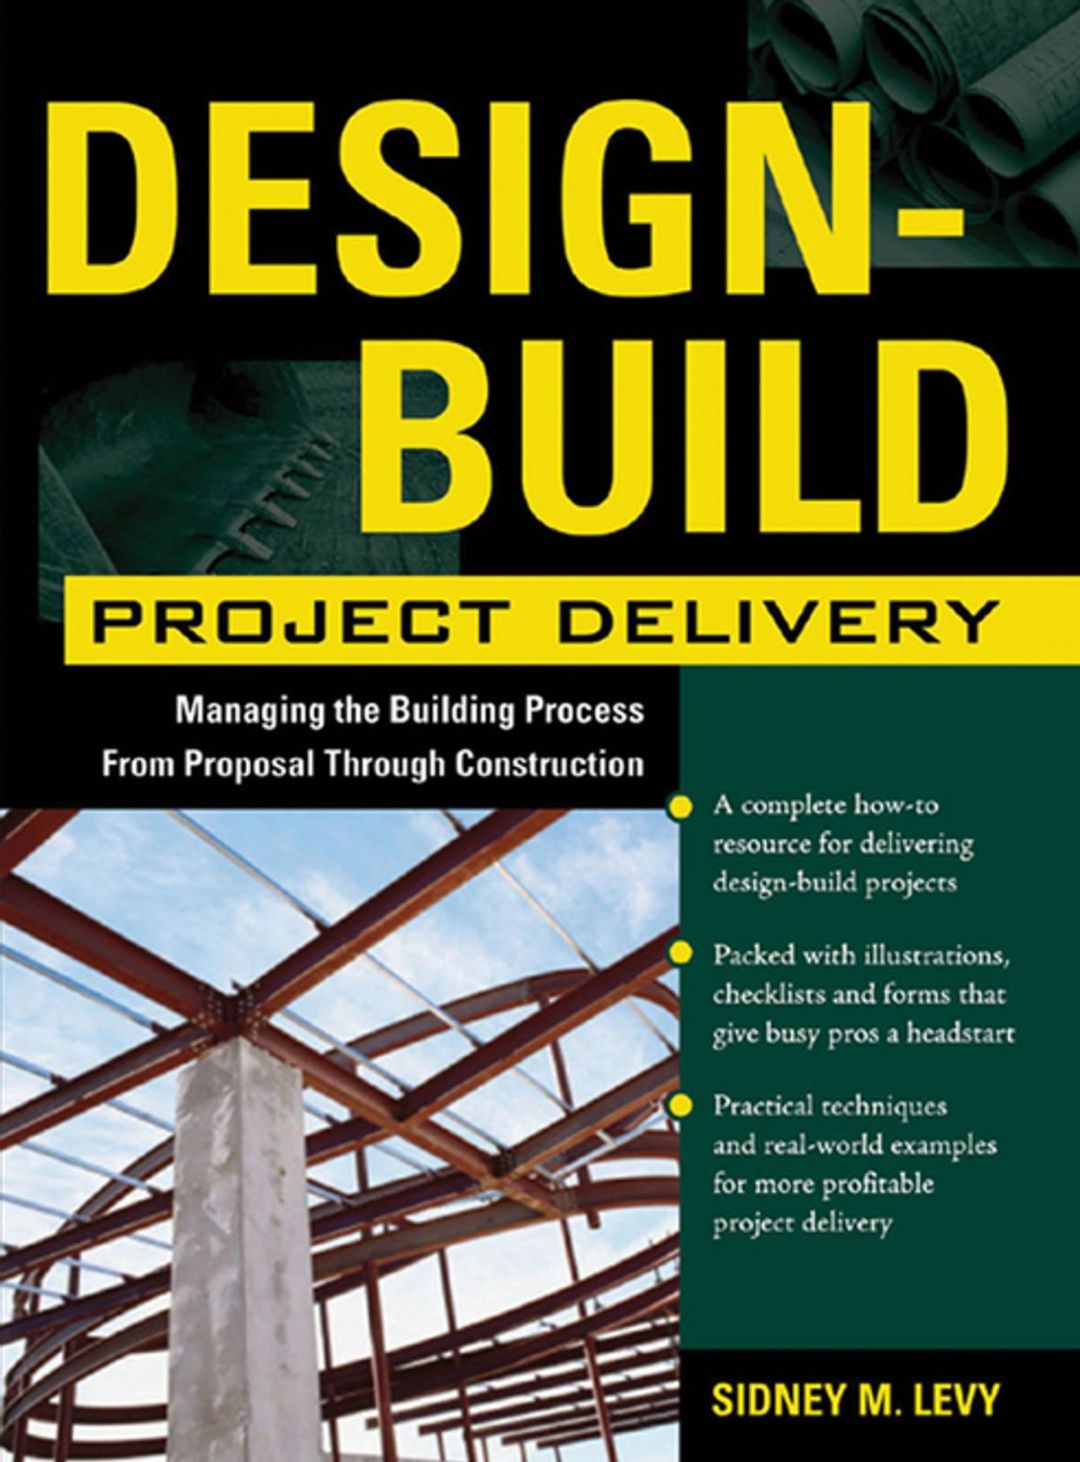 sample designbuild project delivery ebook by sidney m levy  rakuten kobo construction design build proposal template doc